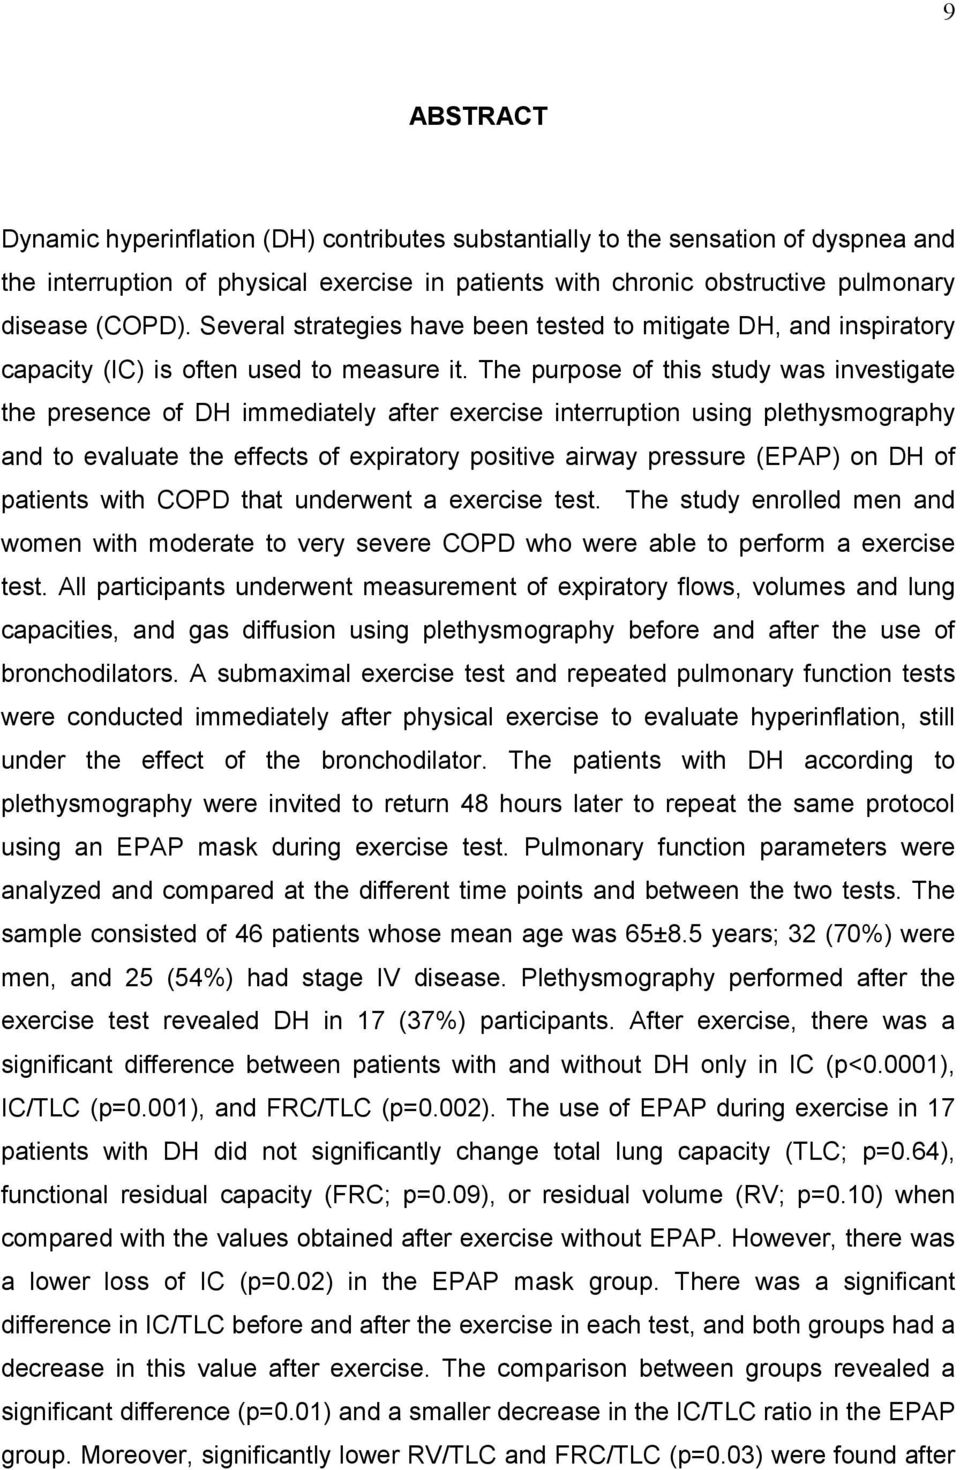 The purpose of this study was investigate the presence of DH immediately after exercise interruption using plethysmography and to evaluate the effects of expiratory positive airway pressure (EPAP) on